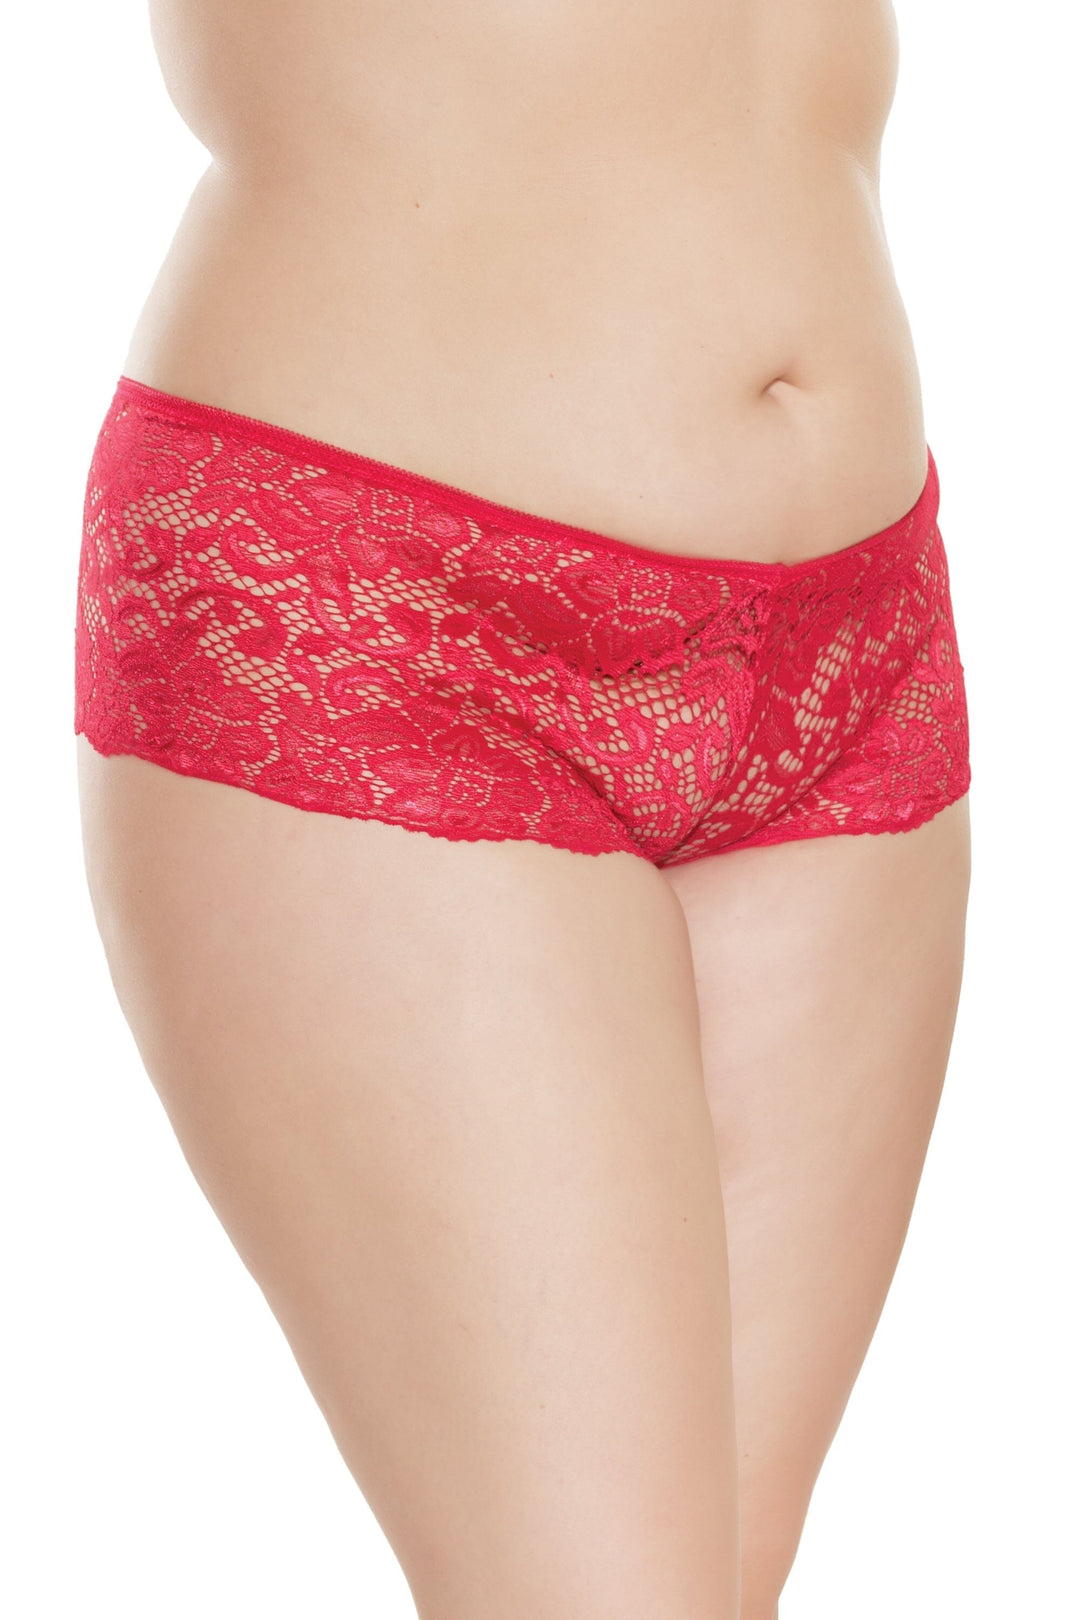 Low Rise Lace Booty Short | Plus Size-Booty Shorts-Coquette-Red-Q-SEXYSHOES.COM